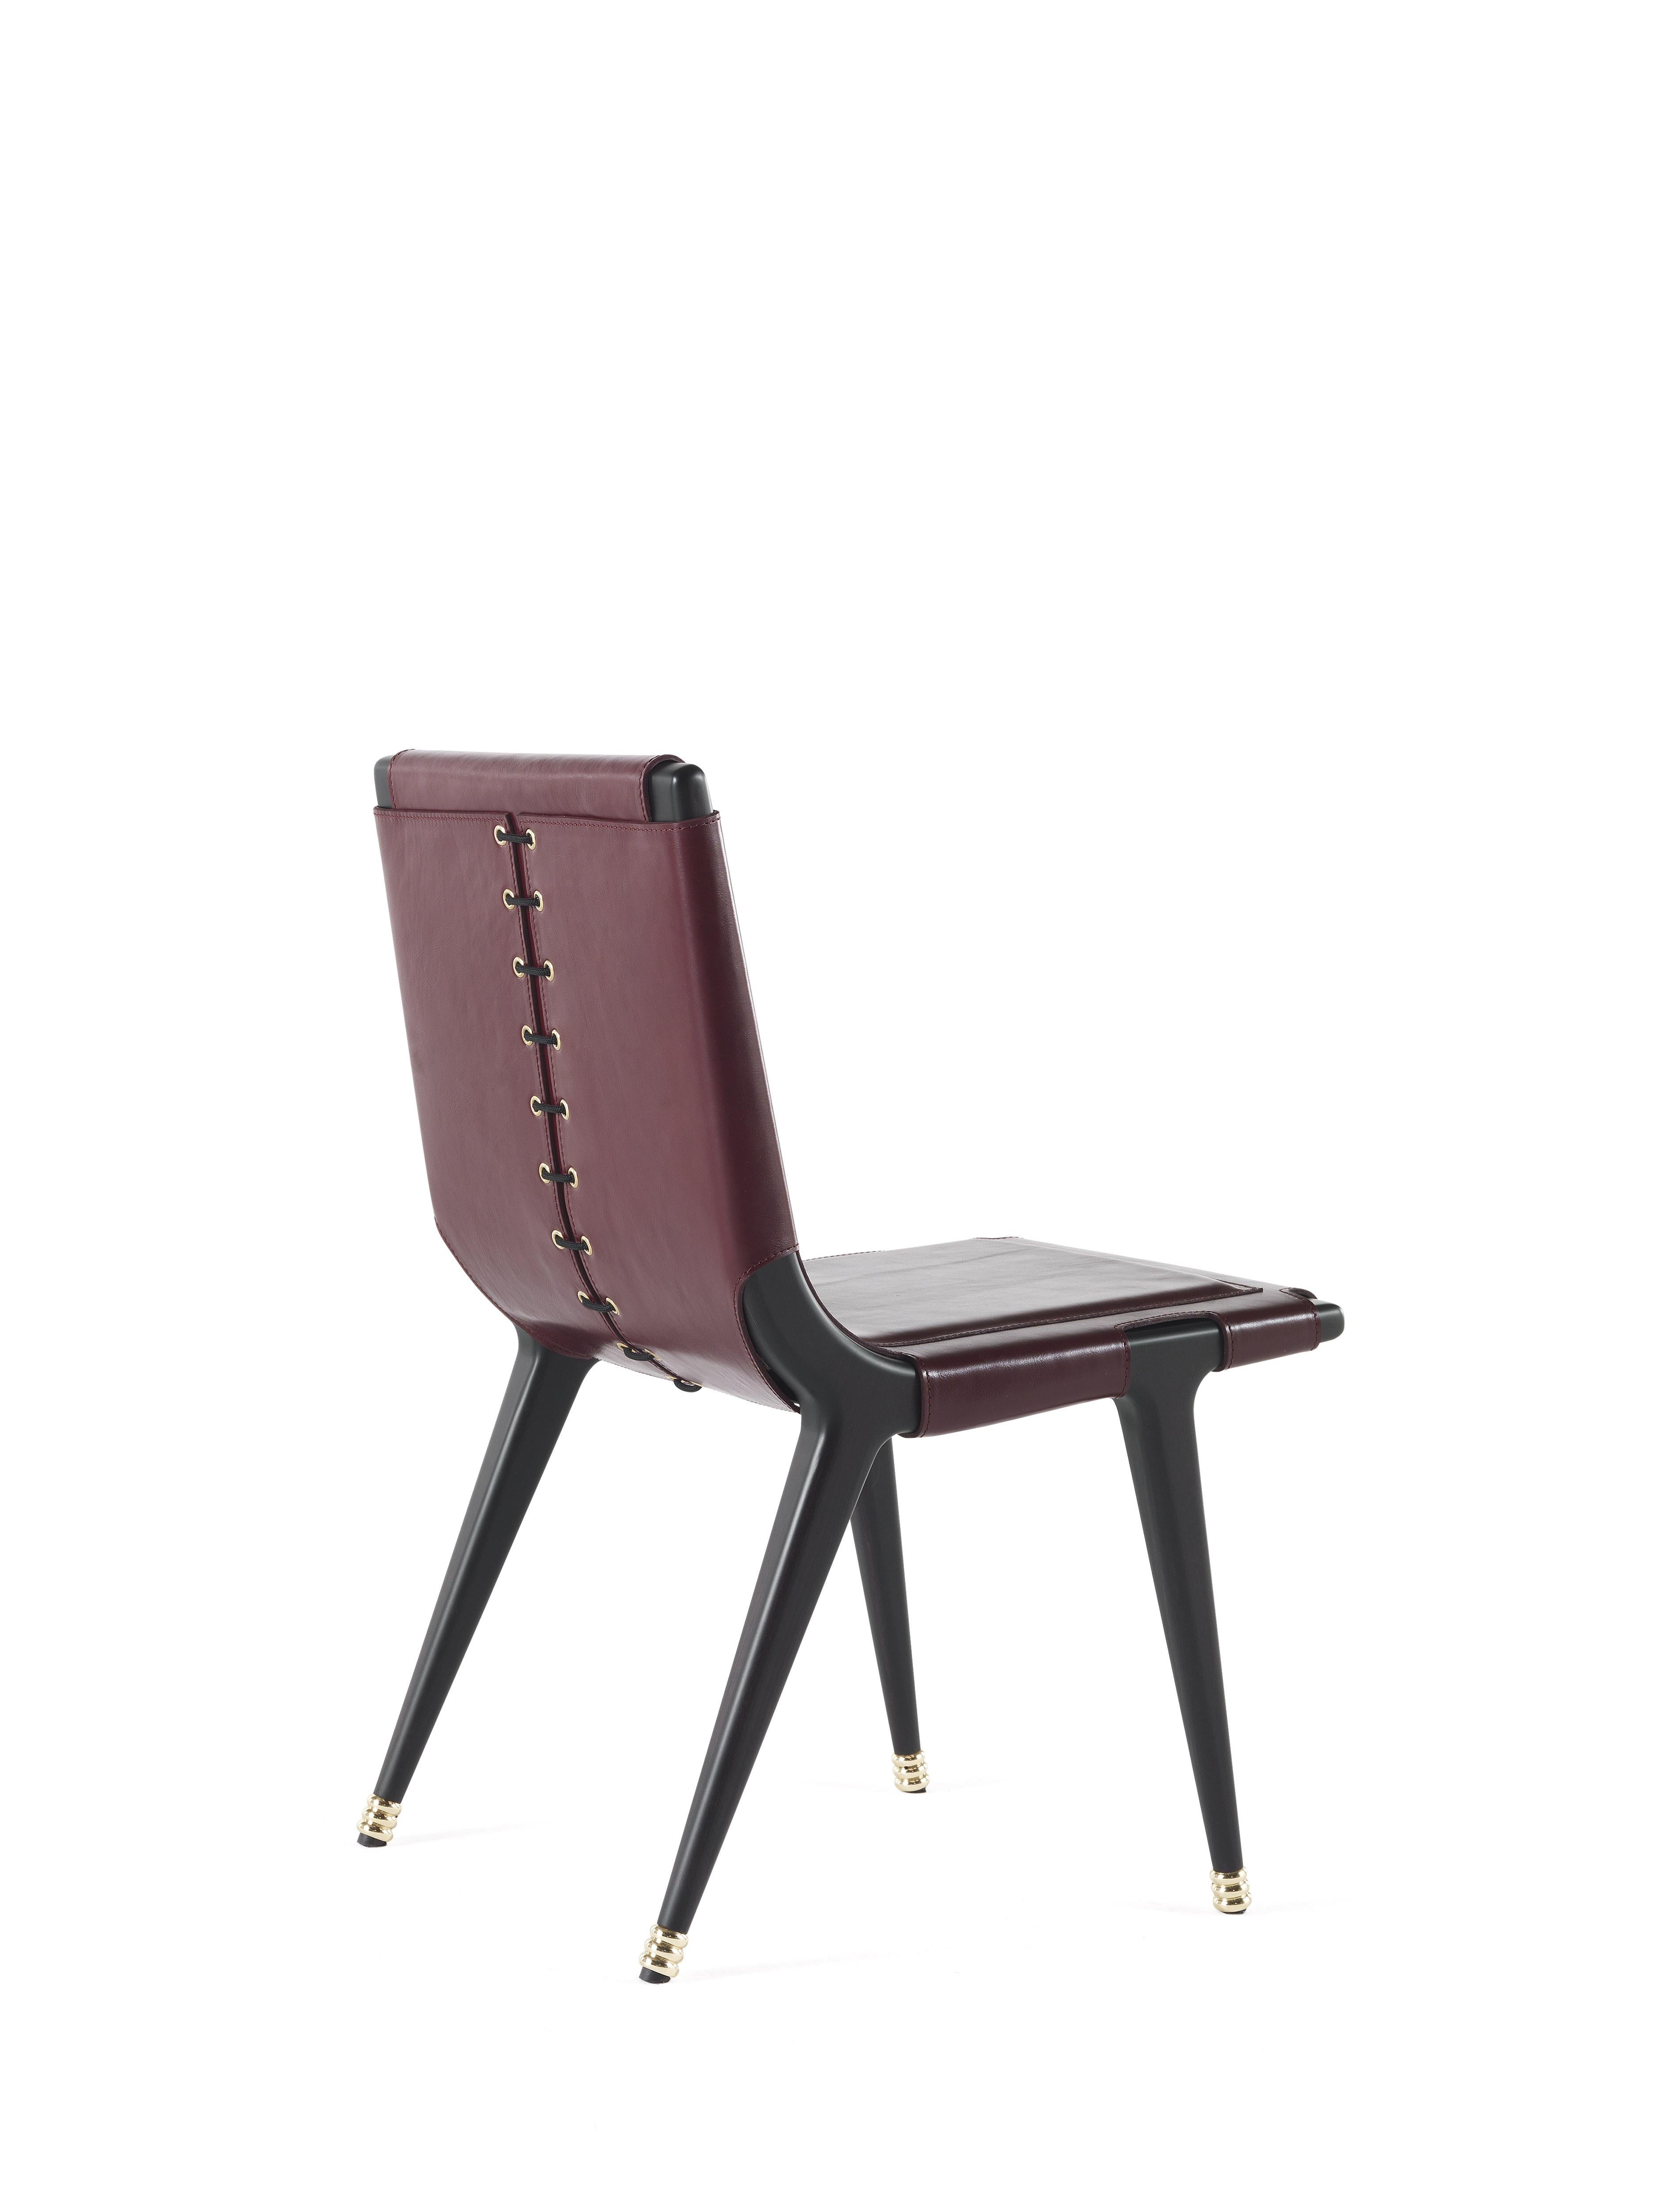 Modern 21st Century Dinka Chair in Leather by Etro Home Interiors